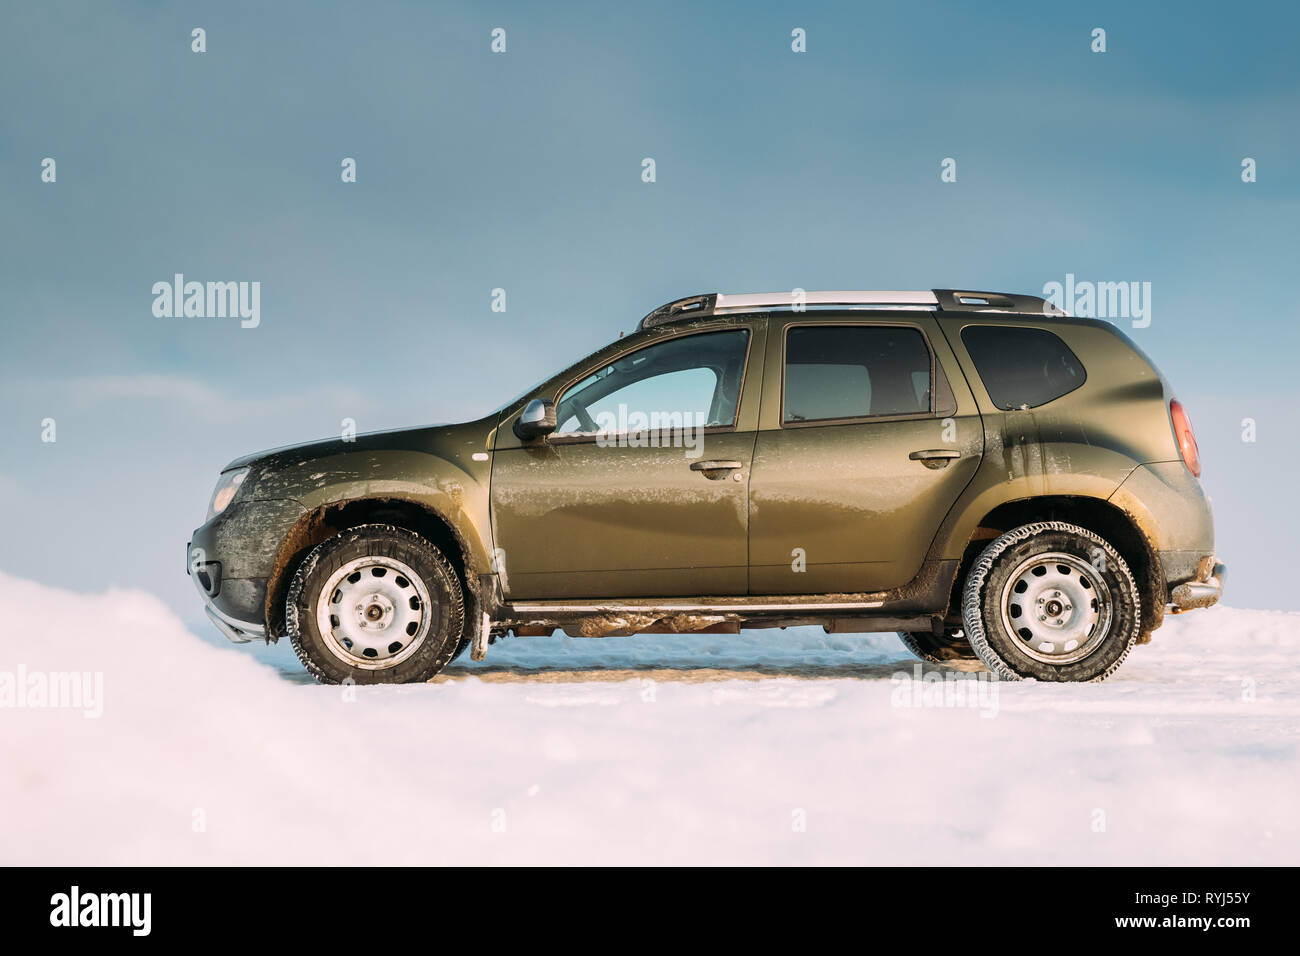 Gomel, Belarus - January 10, 2019: Car Renault Duster Or Dacia Duster Suv Parked On Roadside At Winter Day. Duster Produced Jointly By French Manufact Stock Photo